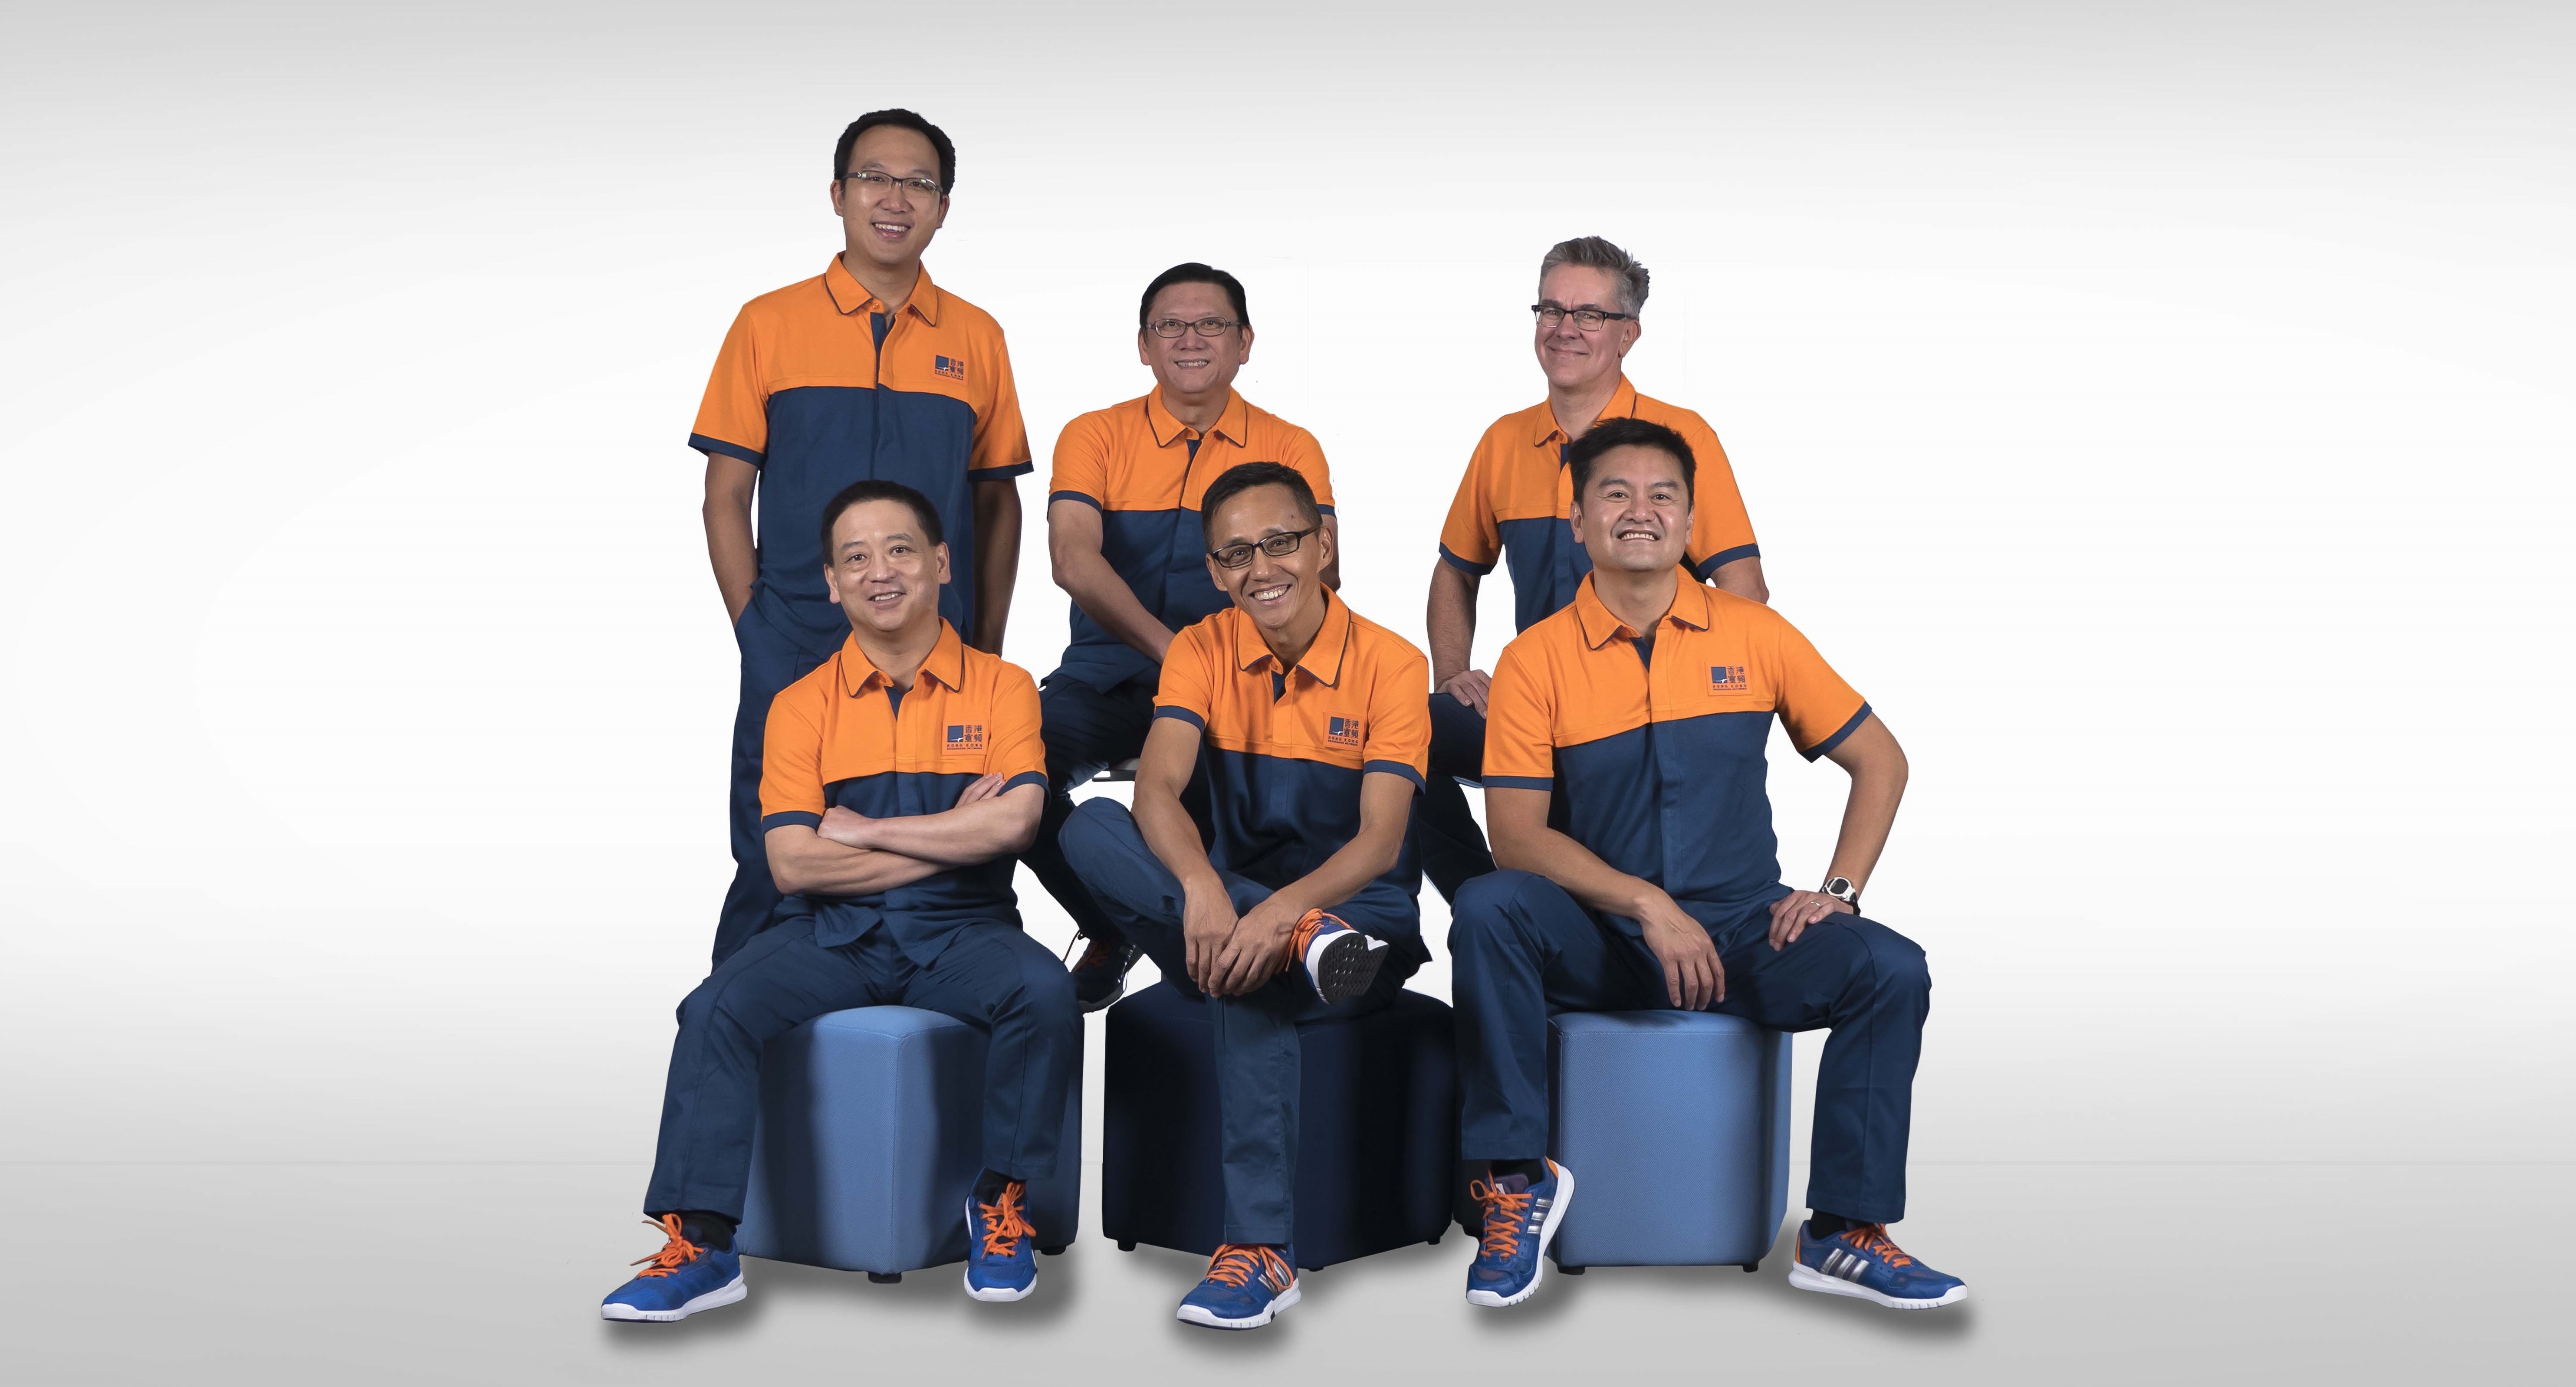 As our new CFO, Andrew (rear, 1st from left) joins the Management Committee team (from left to right; rear) CIO Eric, CTO Gary, (front) Enterprise Solutions COO Billy, CEO William and Group COO NiQ to lead HKBN’s sustained growth and success into the future.